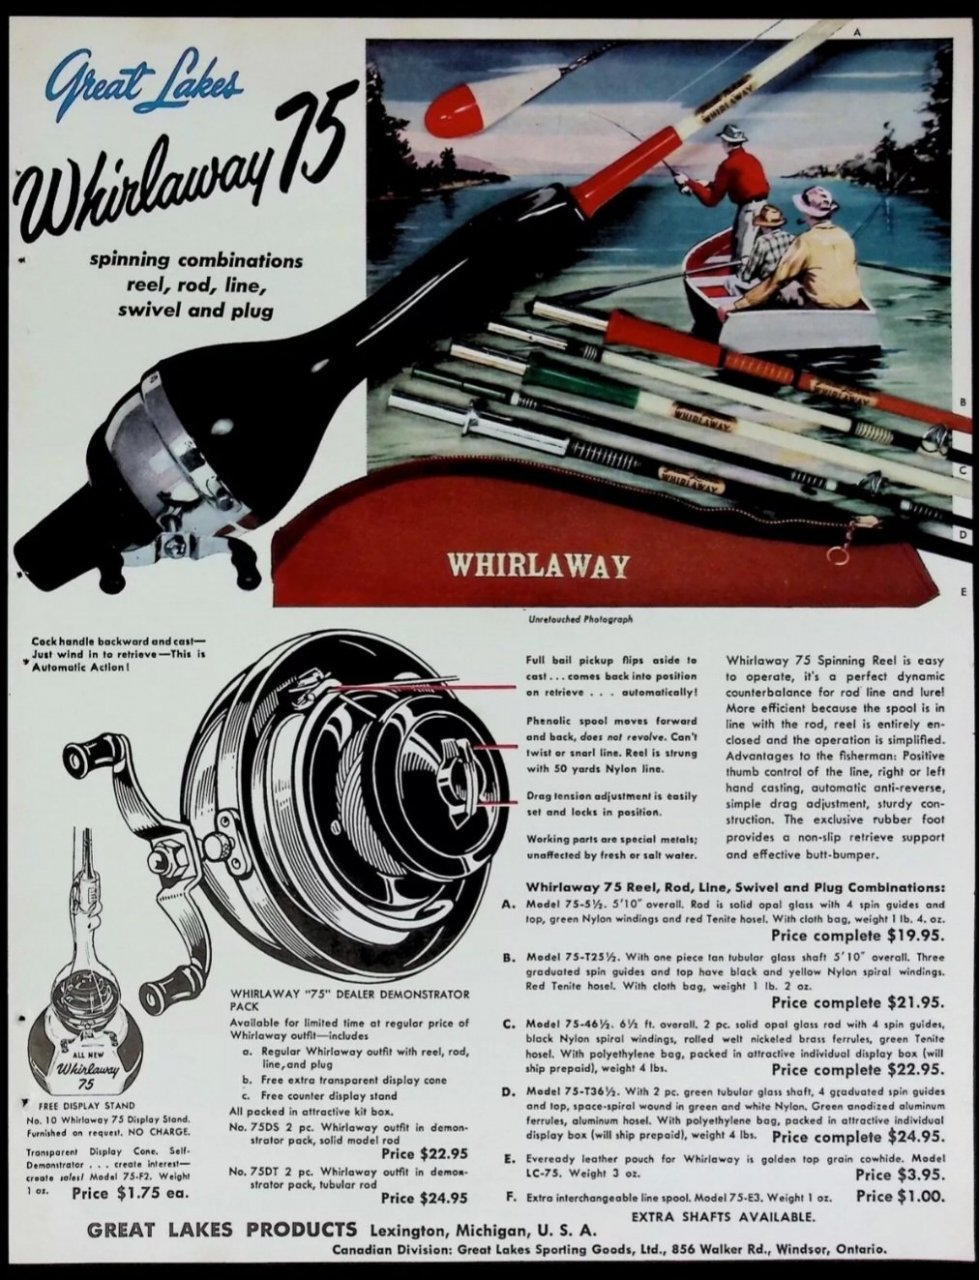 Does Anyone Know How Many Different Models Of The Whirlaway The Great  Lakes